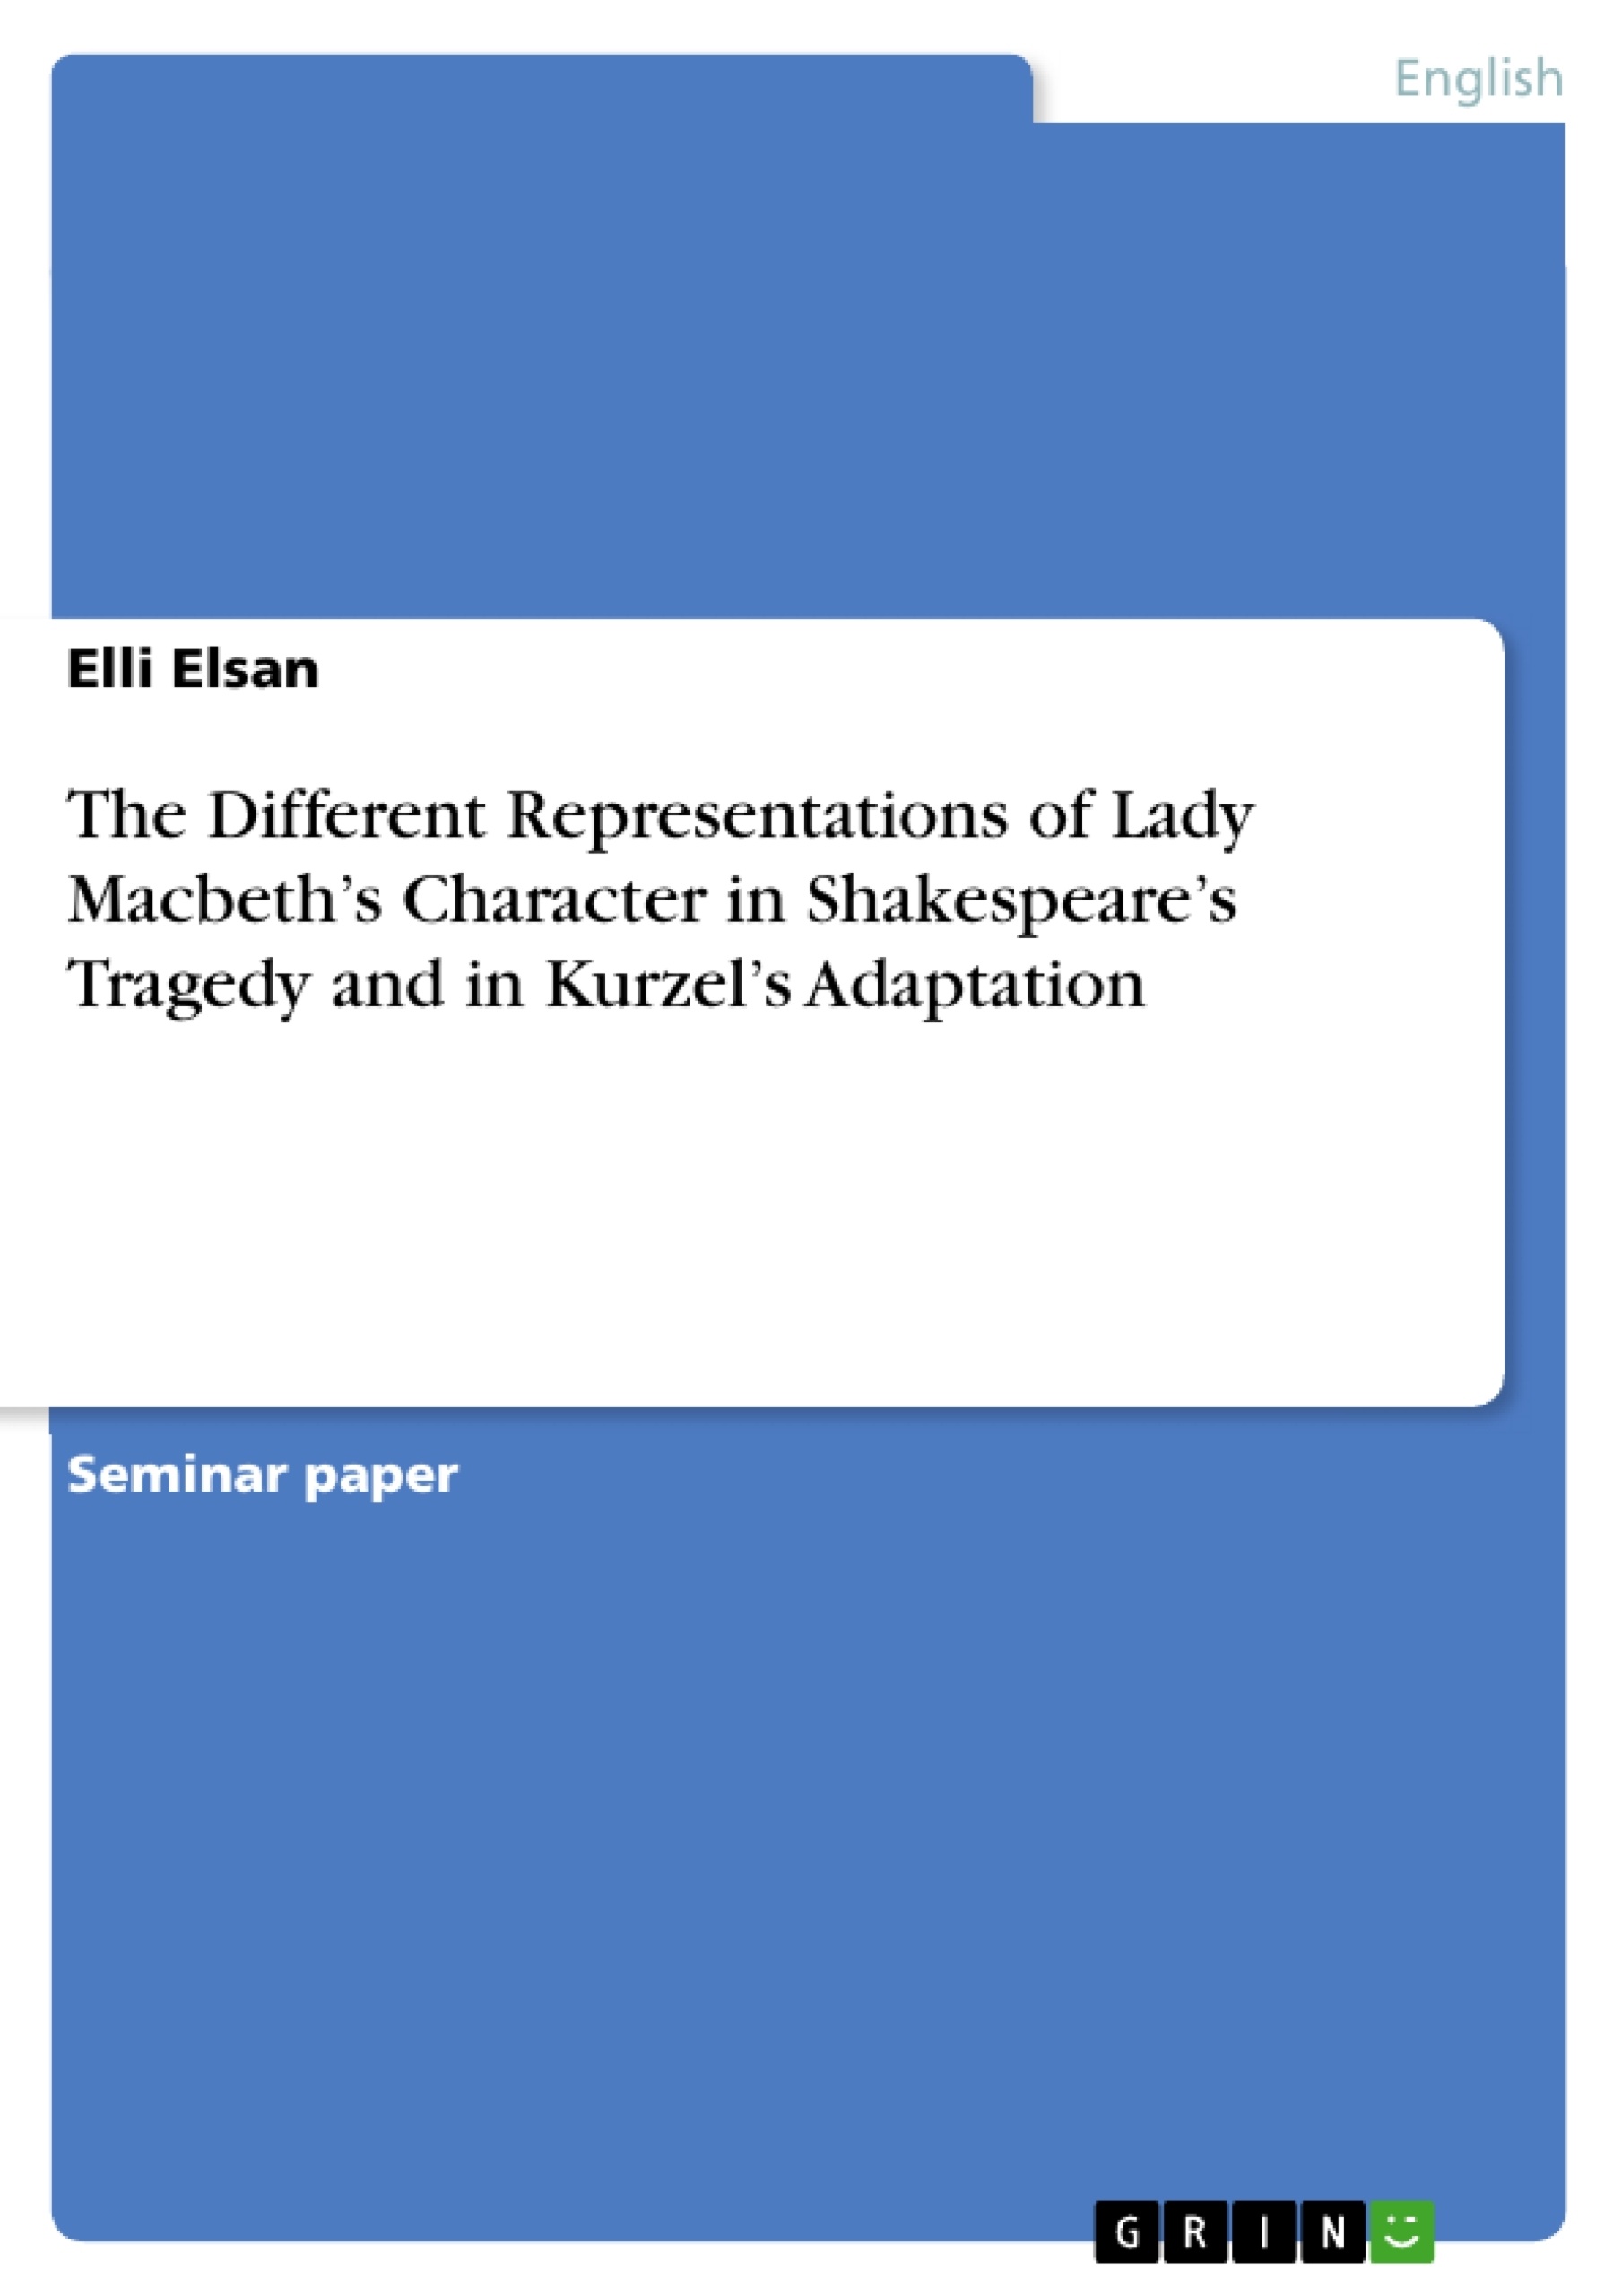 Title: The Different Representations of Lady Macbeth’s Character in Shakespeare’s Tragedy and in Kurzel’s Adaptation